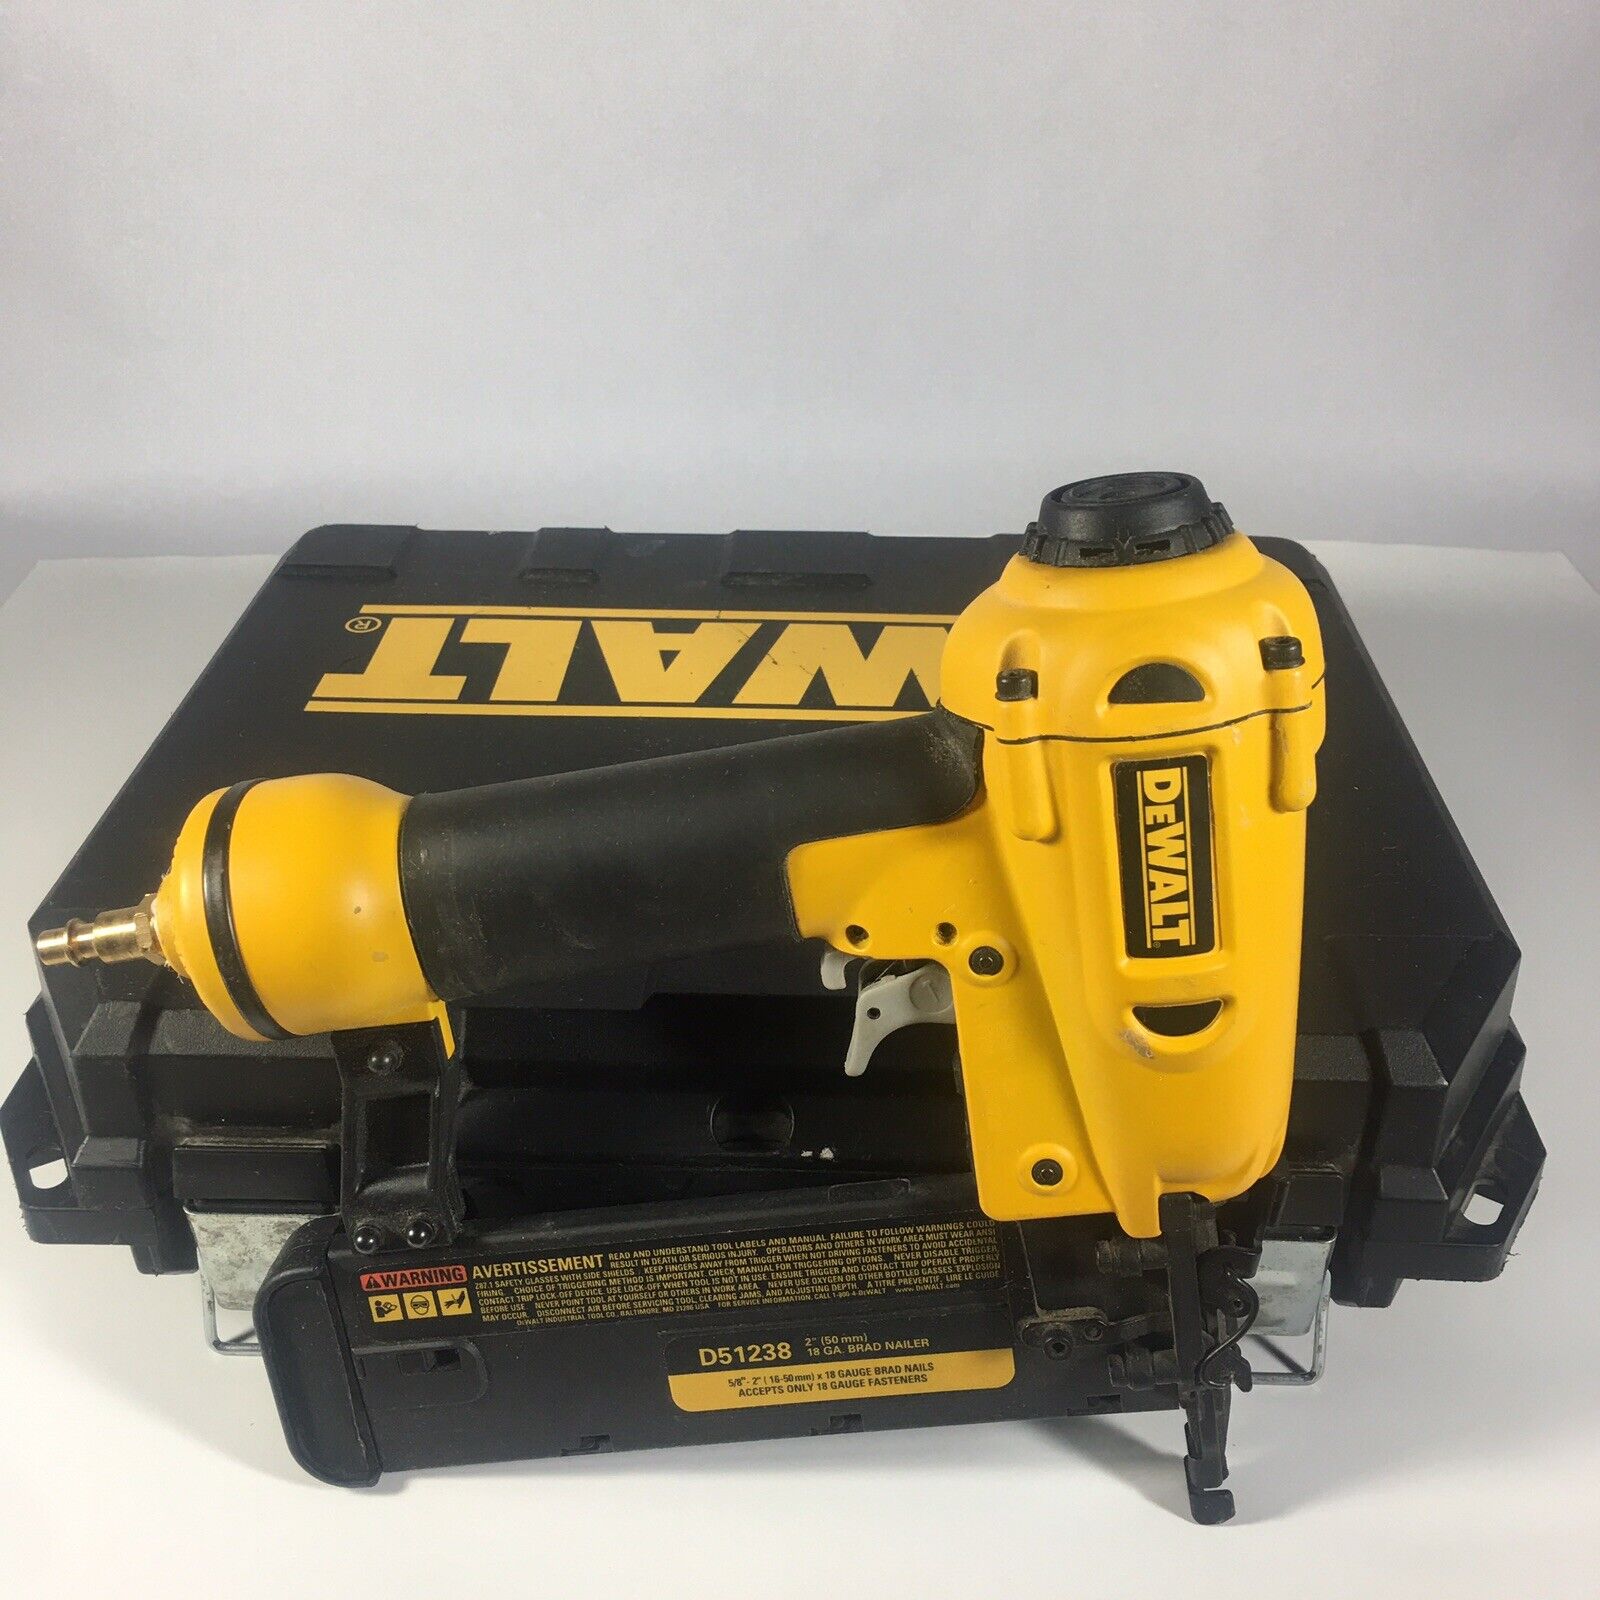 DeWalt D51238 5/8-Inch to 2-Inch 18-Gauge Brad Nailer With Case, Extra Nails